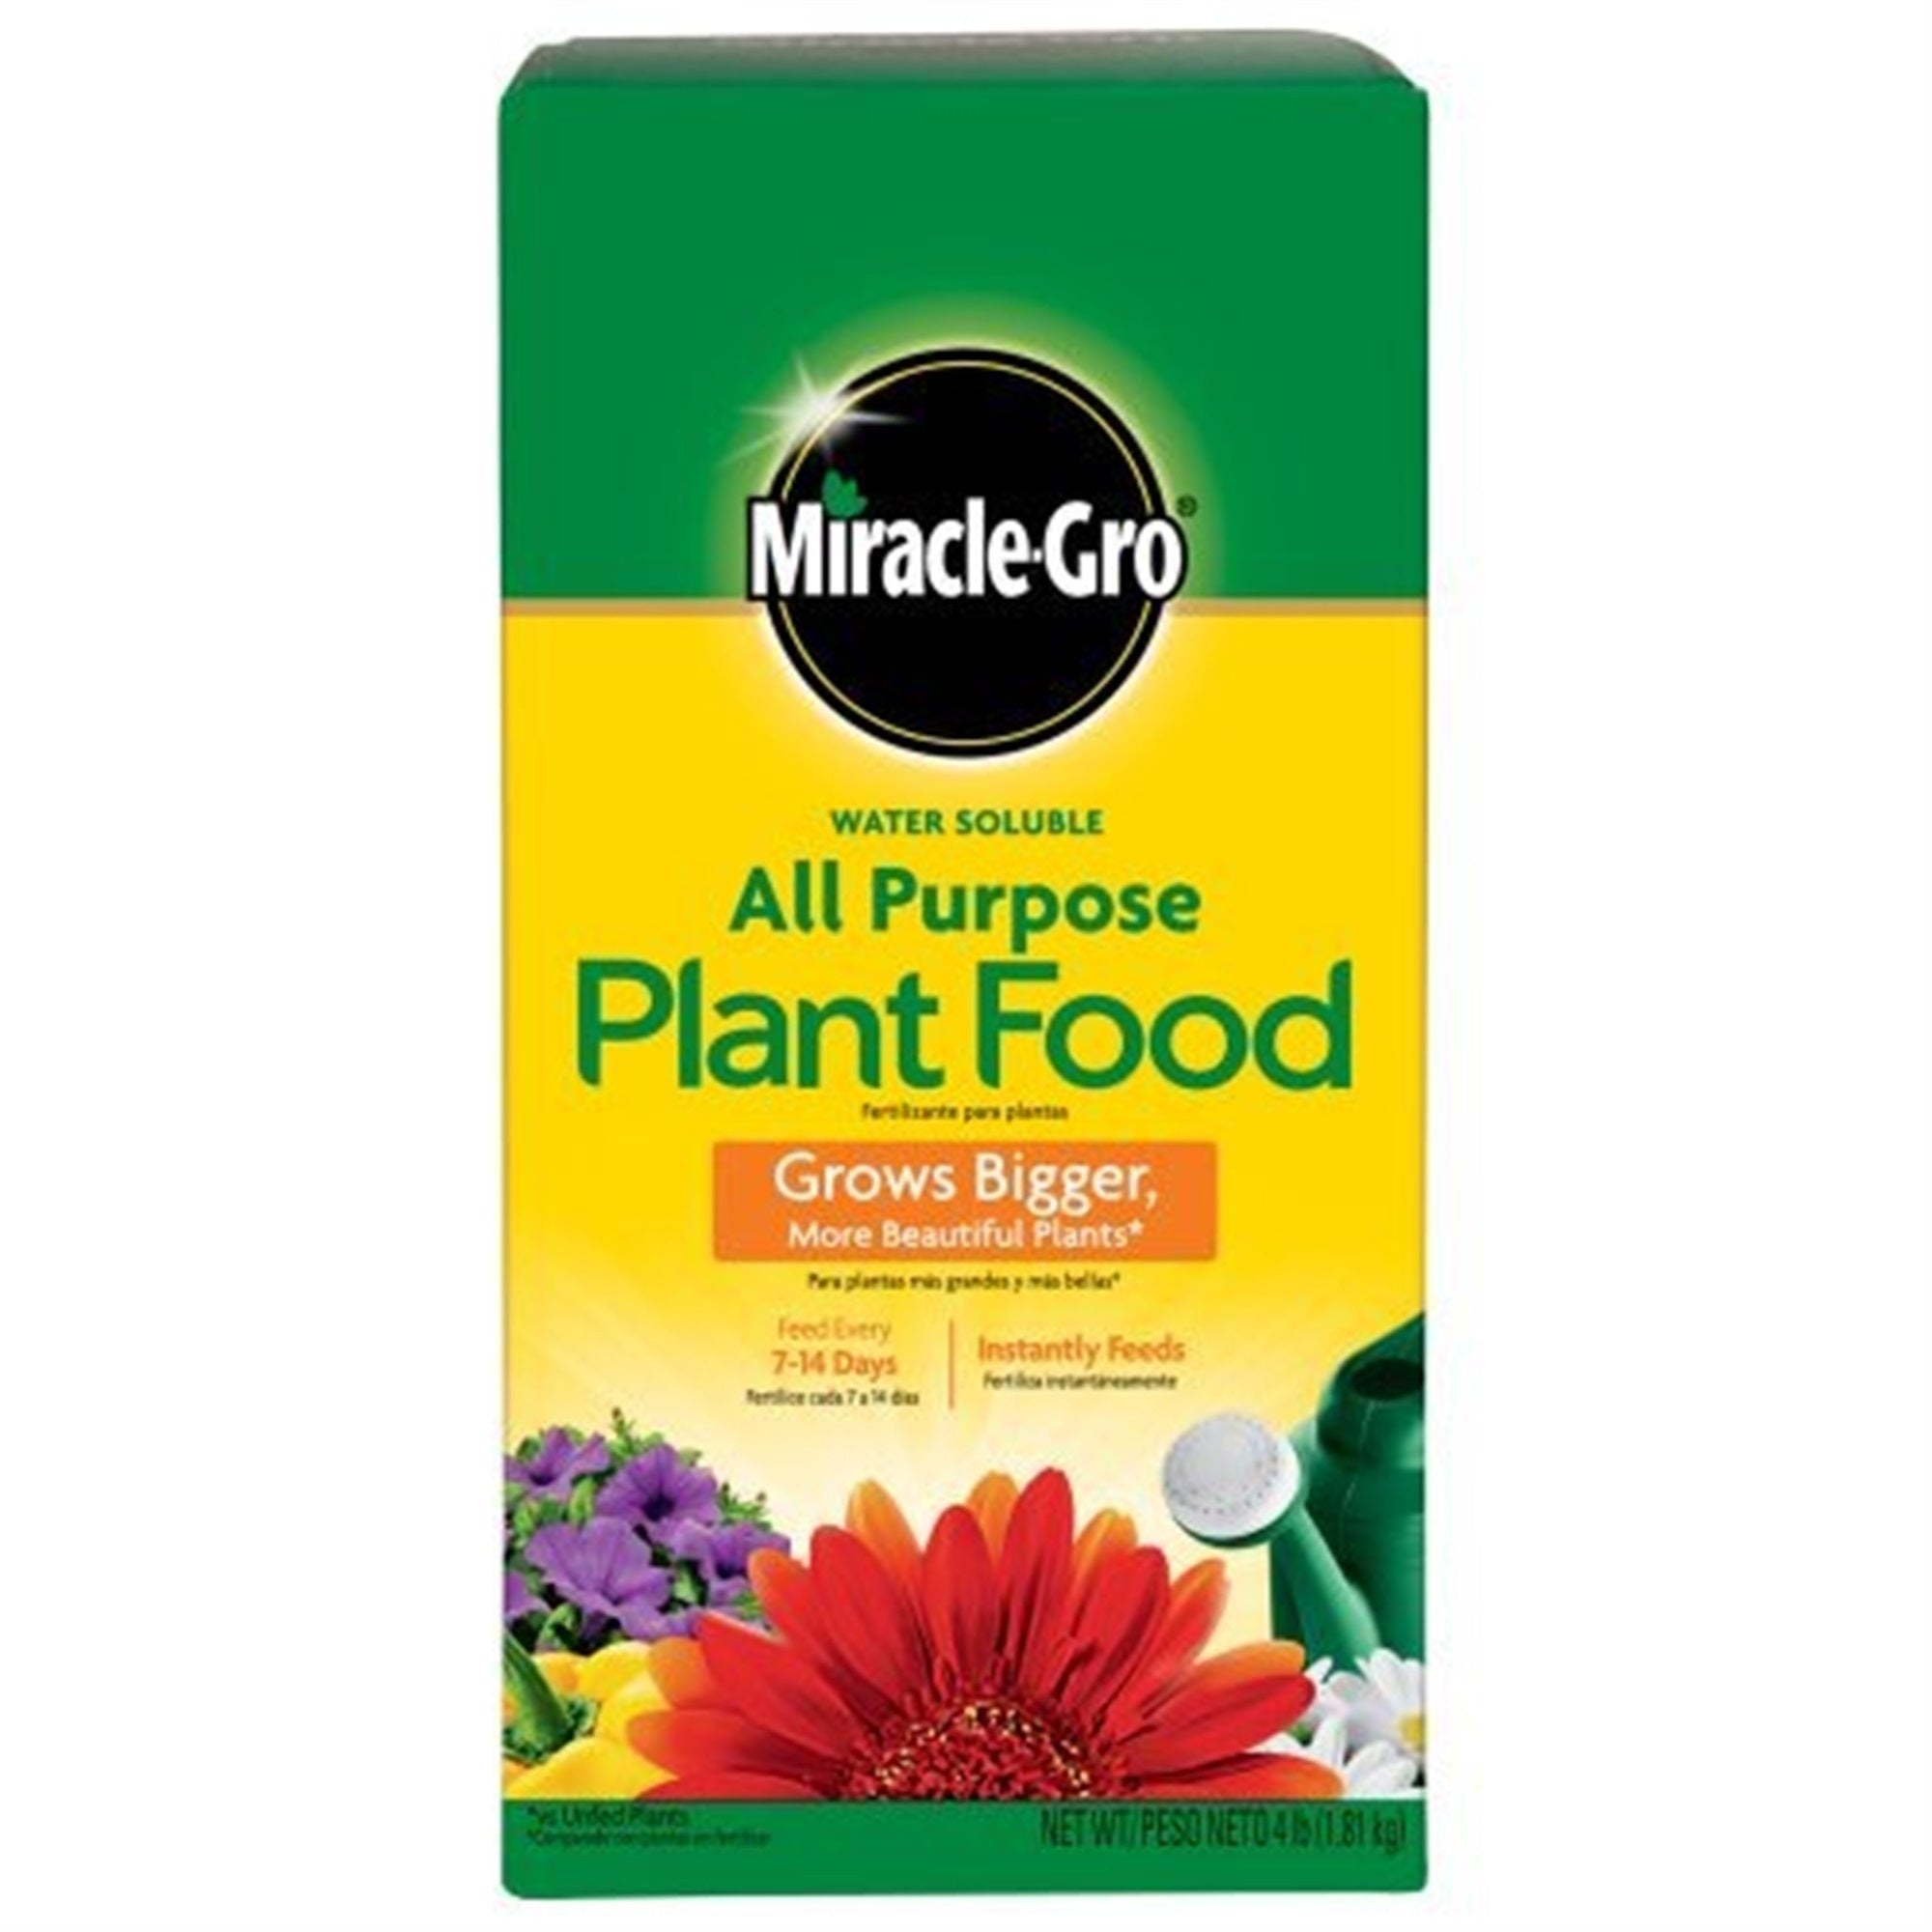 Miracle-Gro Water Soluble All Purpose Plant Food, 4lb